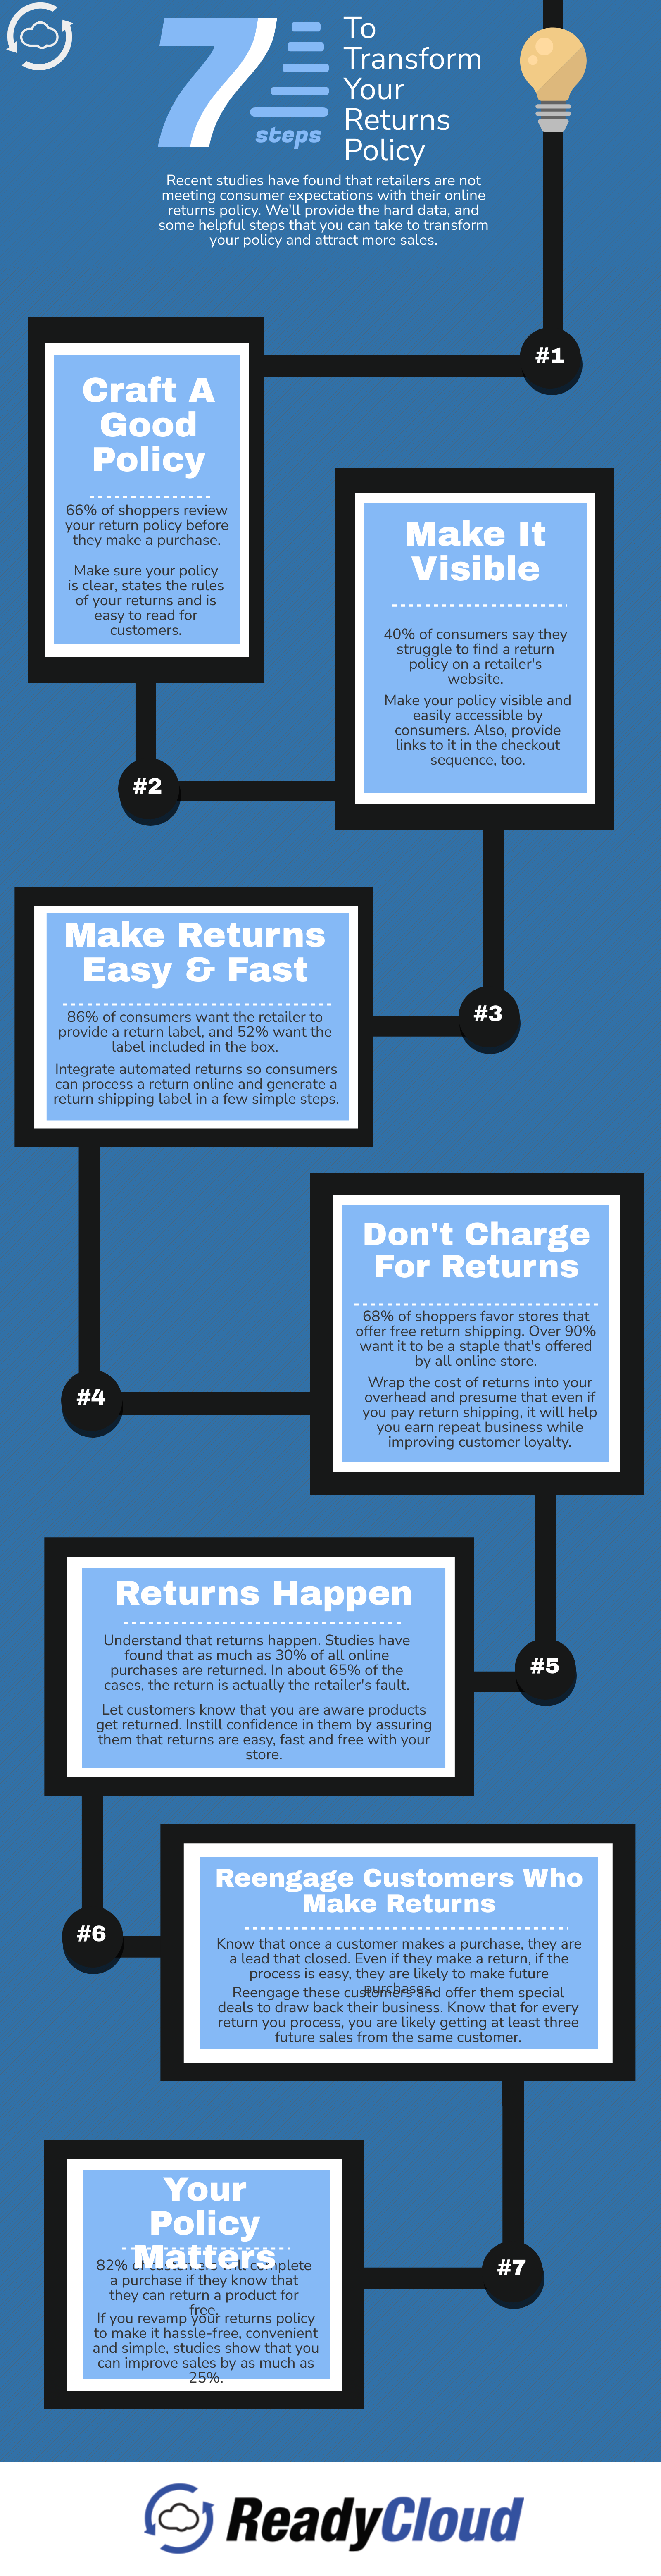 We leave you with this infographic we’ve created that can help you better tailor your return policy to the consumer mindset.